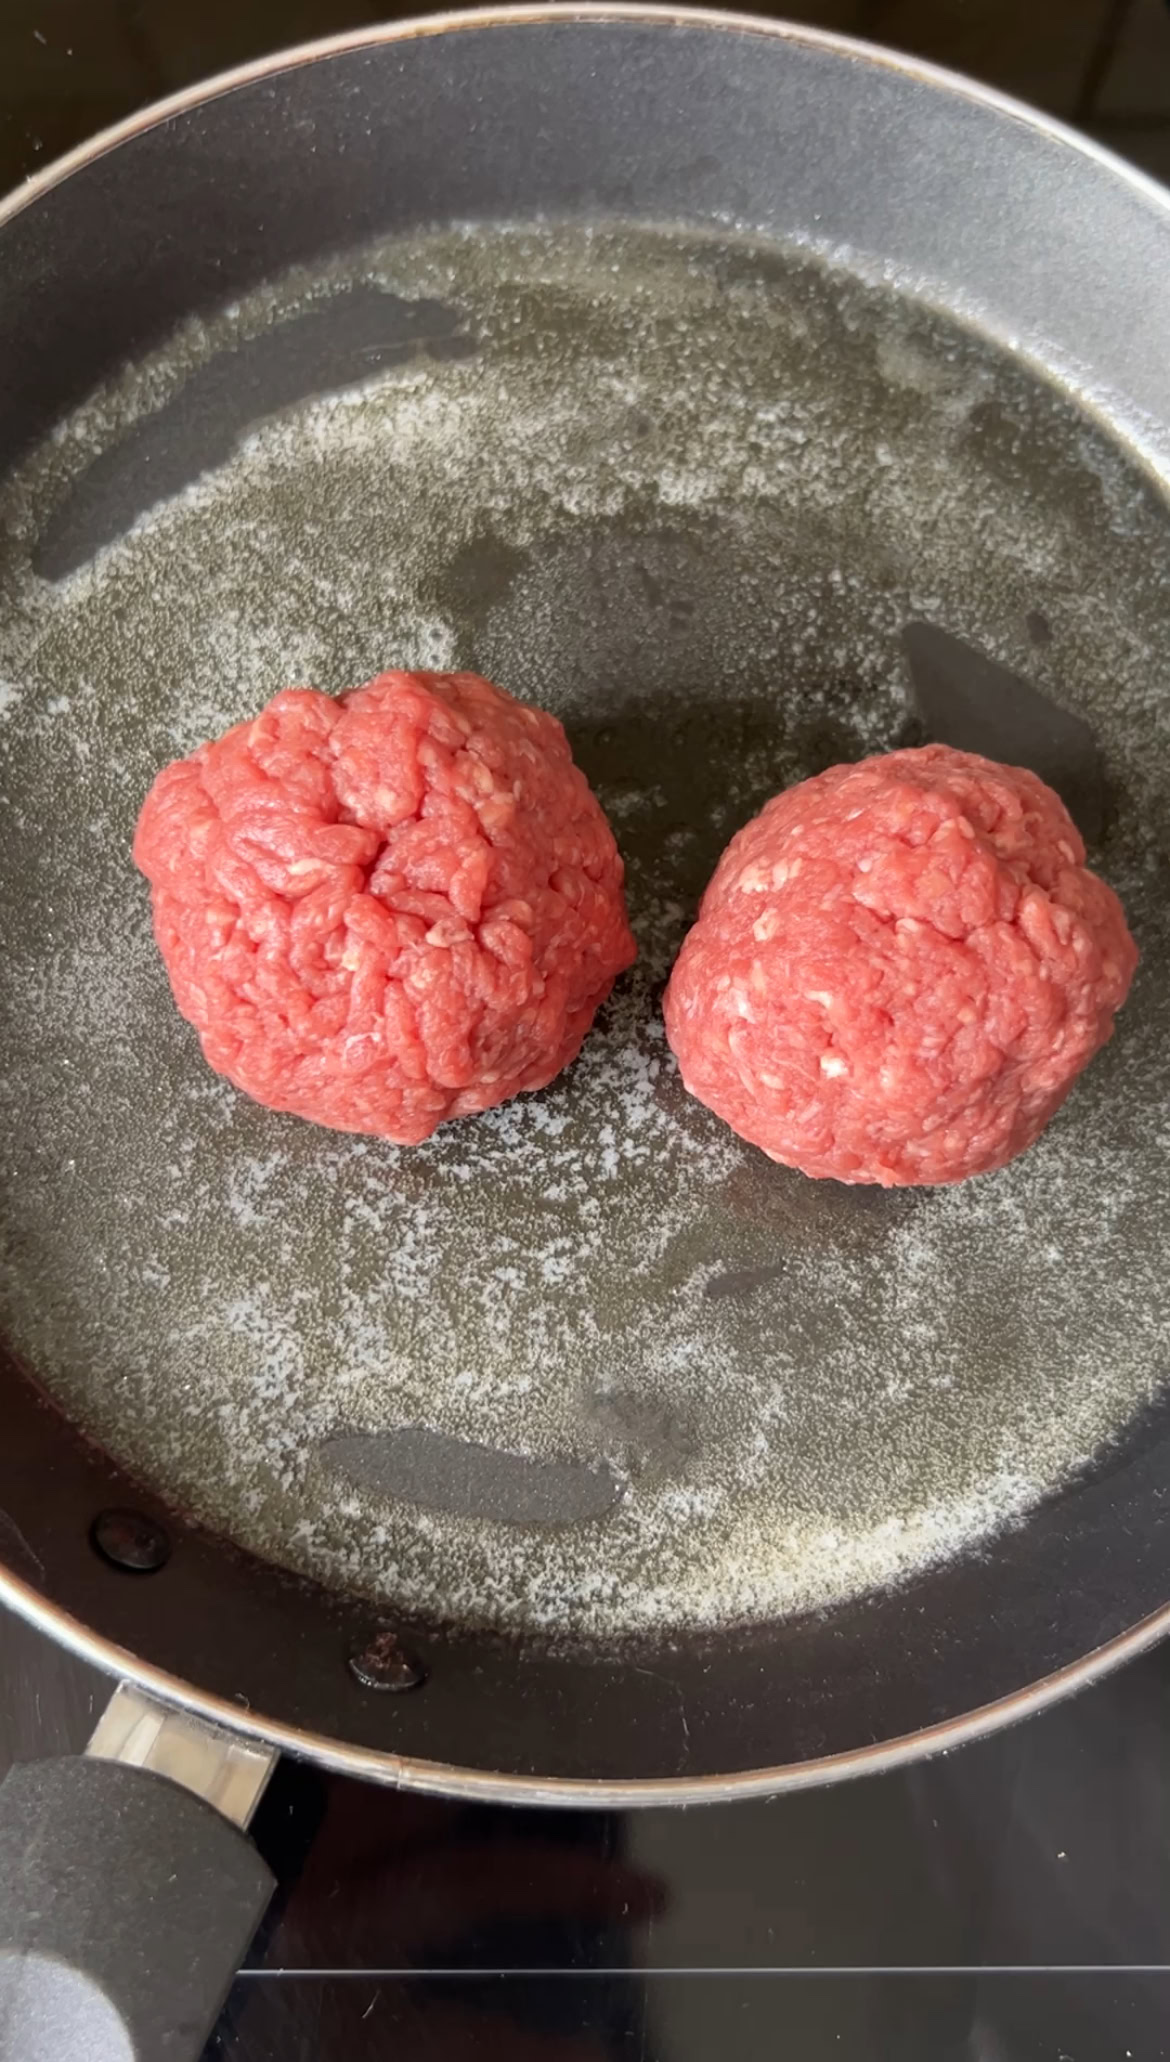 Two meatballs in a dark frying pan with butter.